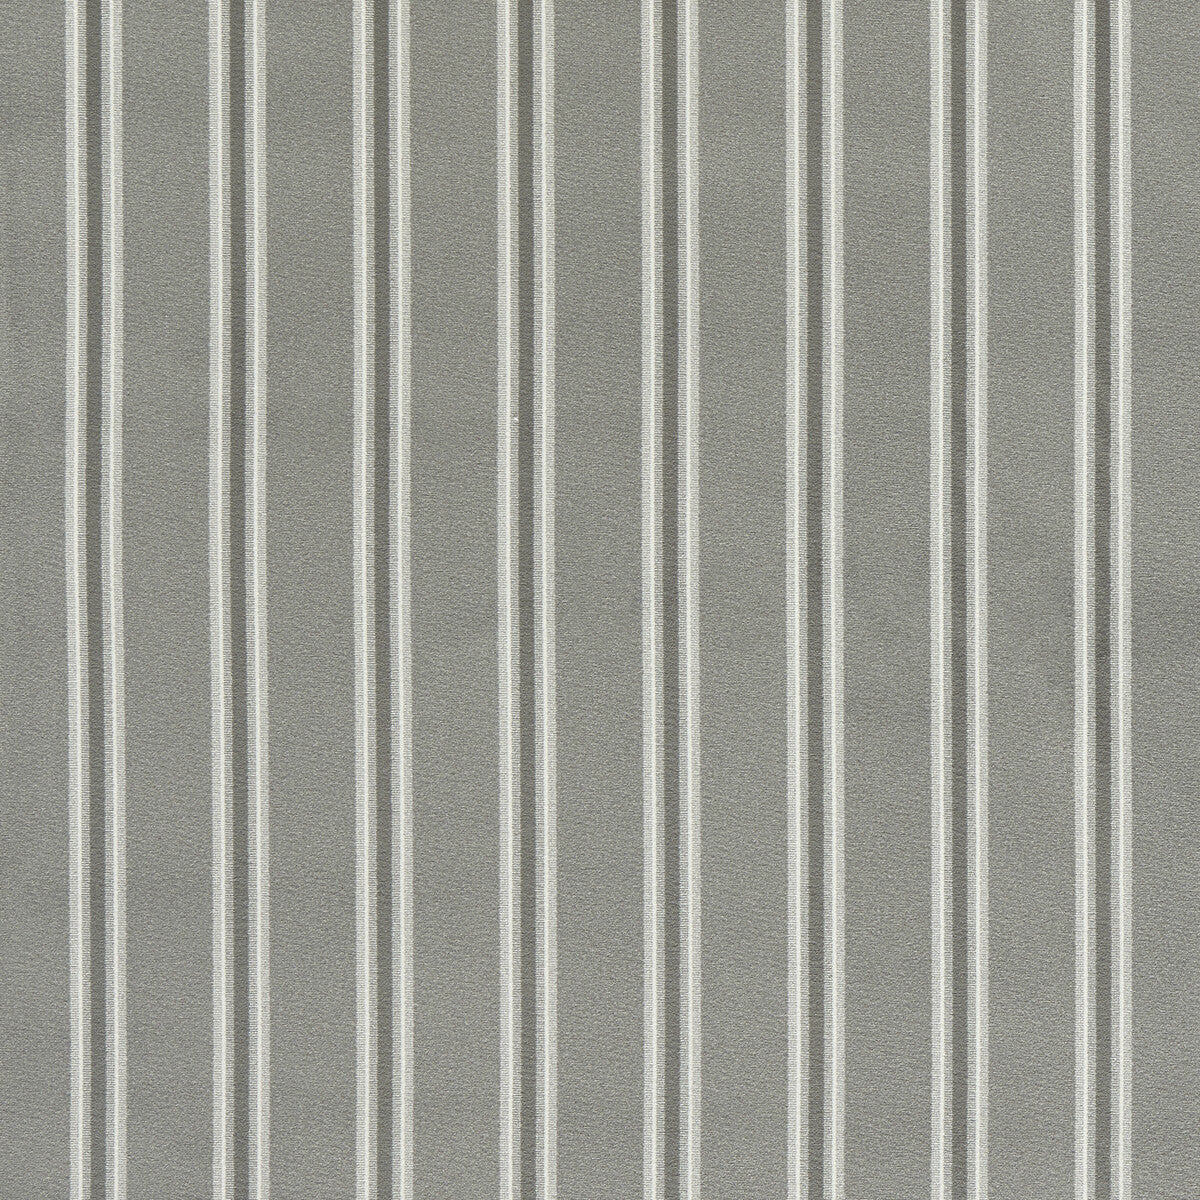 Bowfell fabric in graphite color - pattern F1689/04.CAC.0 - by Clarke And Clarke in the Whitworth collection